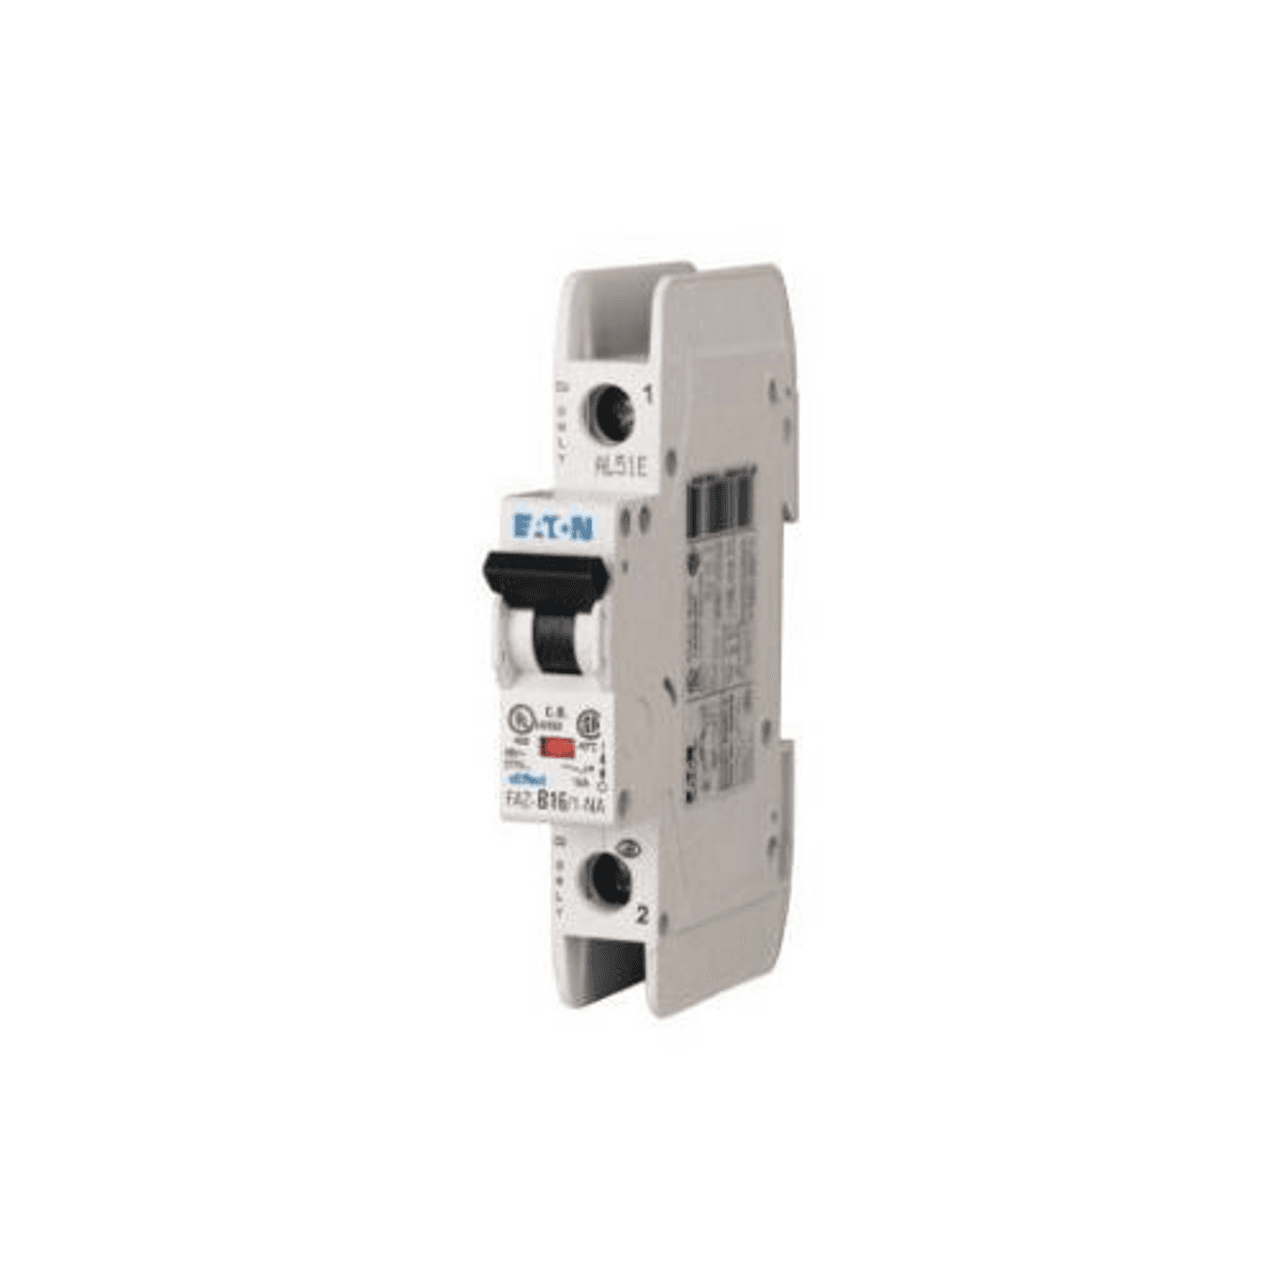 Eaton FAZ-C1/1-NA-SP Eaton FAZ branch protector,UL 489 Industrial miniature circuit breaker - supplementary protector,Single package,Medium levels of inrush current are expected,1 A,10 kAIC,Single-pole,277 V,5-10X /n,Q38,50-60 Hz,Screw terminals,C Curve